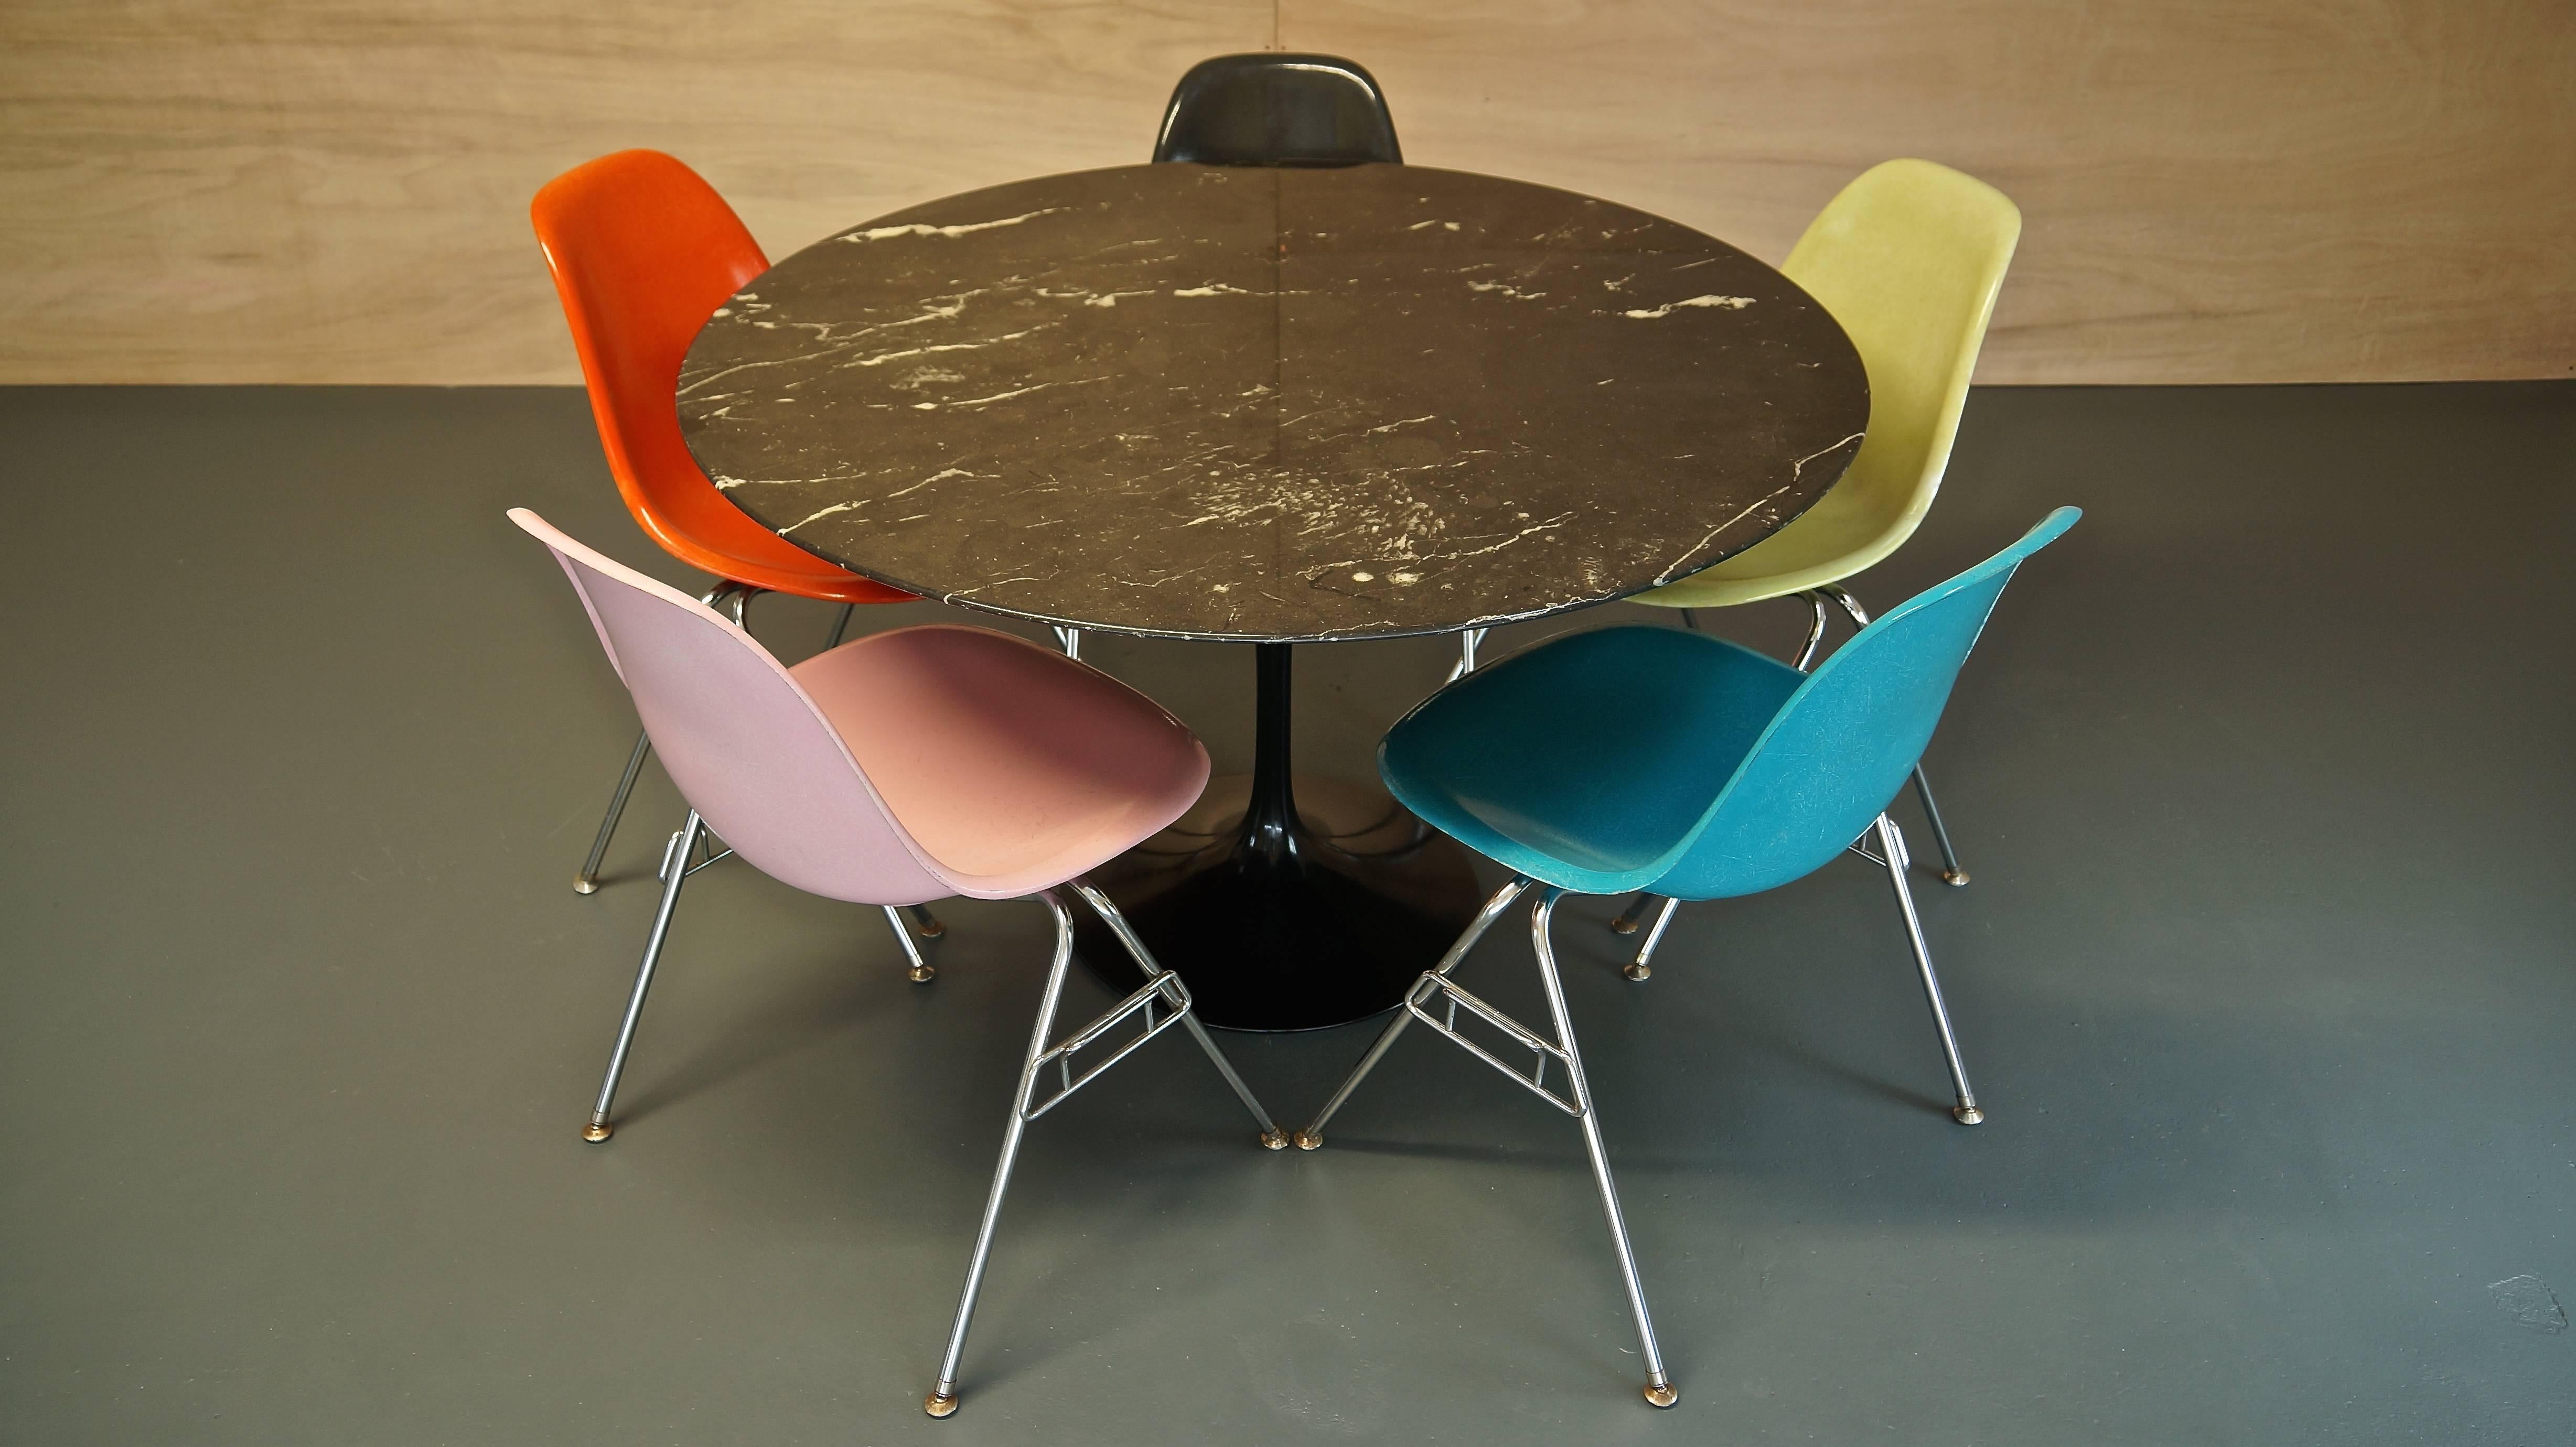 Charles Eames fiberglass stacking shell side chairs on chromed steel stacking bases.

Excellent clean condition with minor signs of wear.

We have 22 chairs currently available in various colors:

UPDATE: Last 3 available

Lime green,
burnt